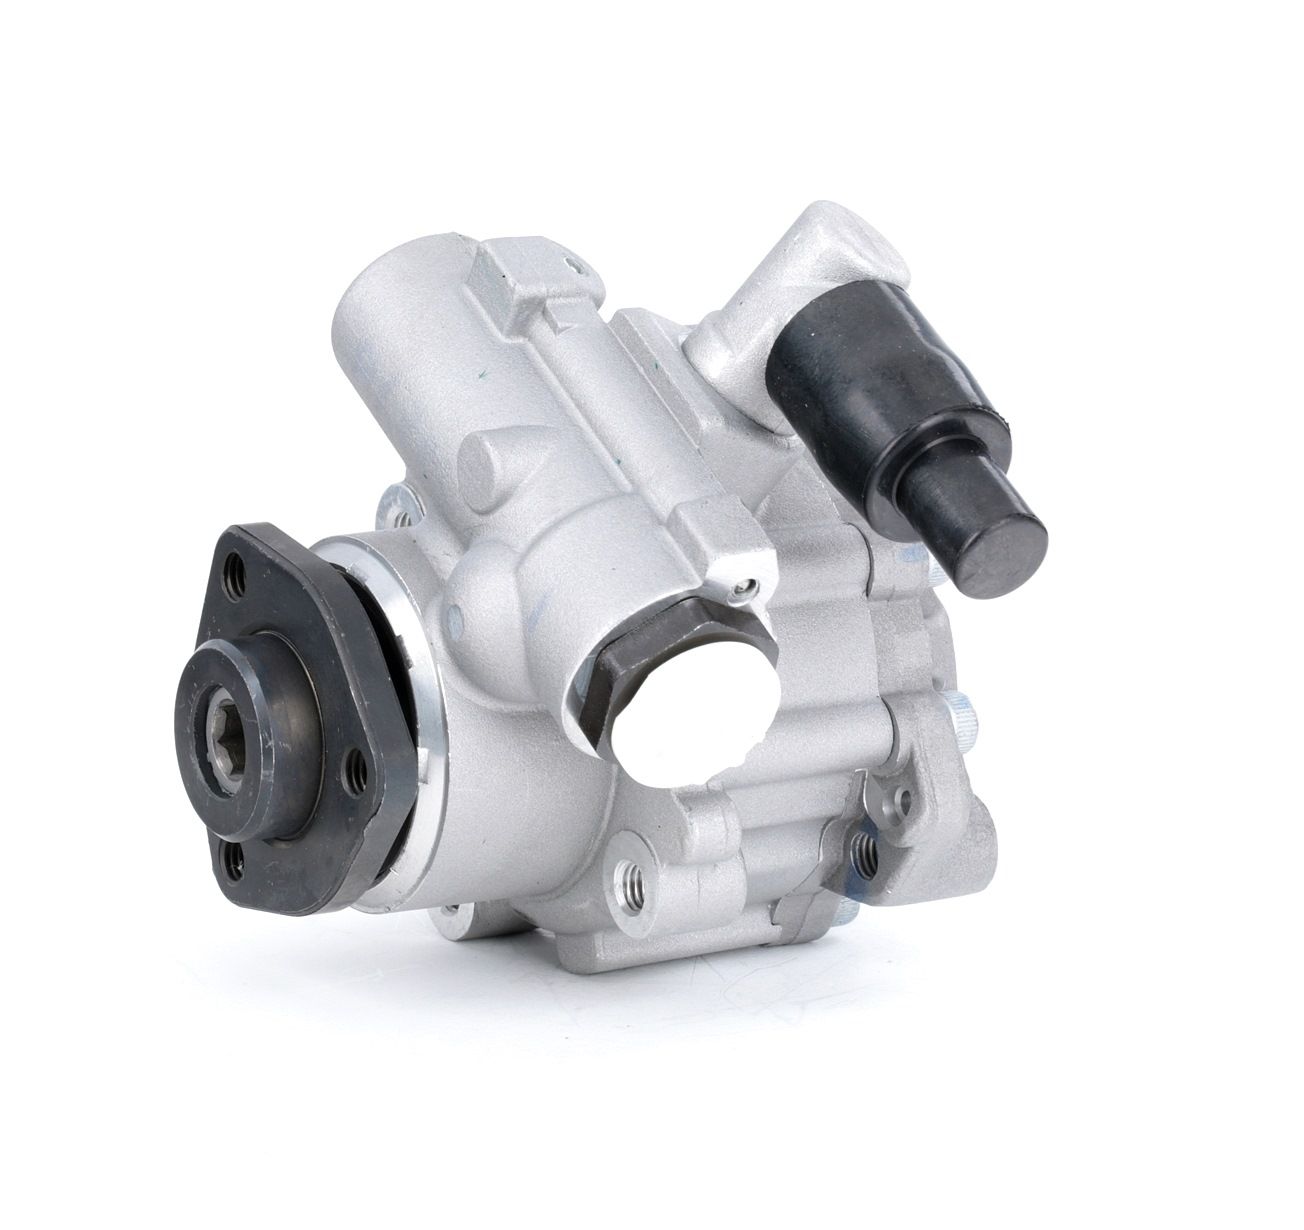 STARK SKHP-0540082 Power steering pump Hydraulic, 100 bar, 80 l/h, for left-hand/right-hand drive vehicles